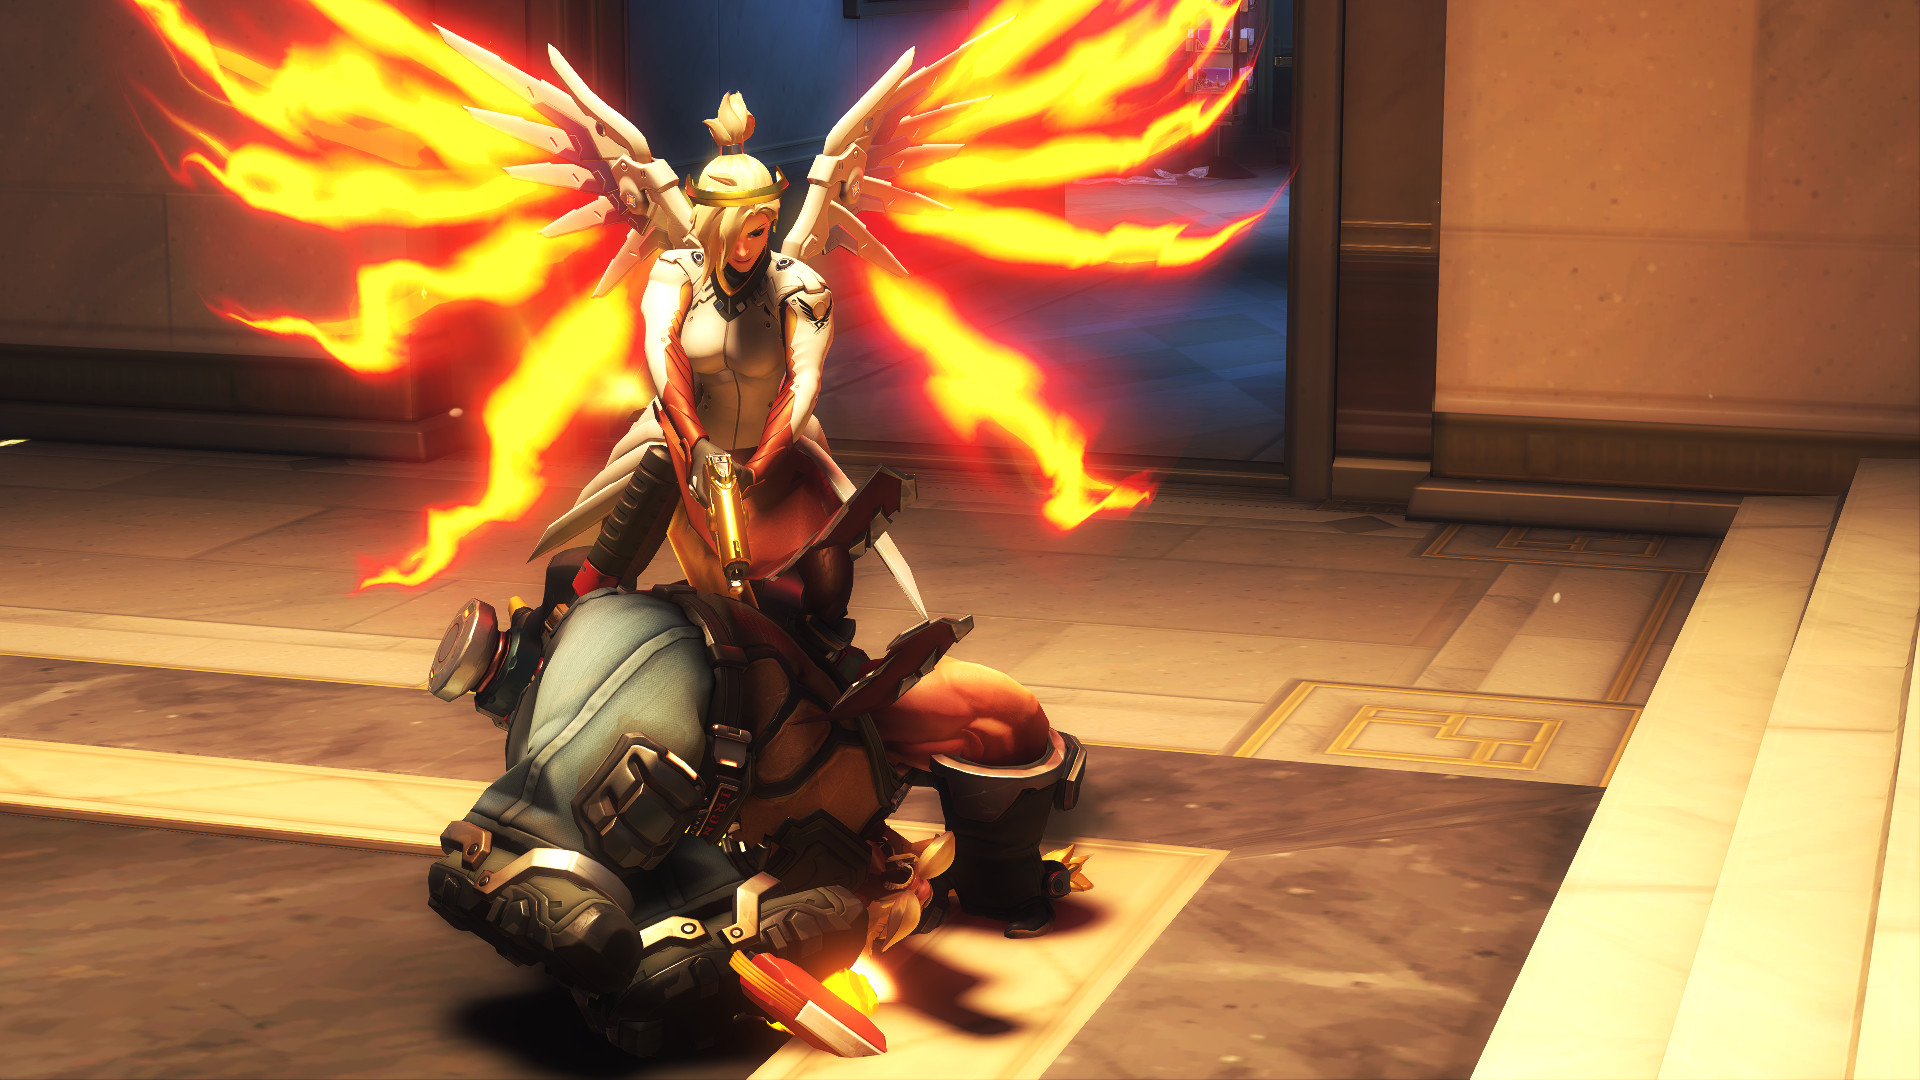 Mercy (from Overwatch) aims her pistol at the collapsed Torbjorn by her feet